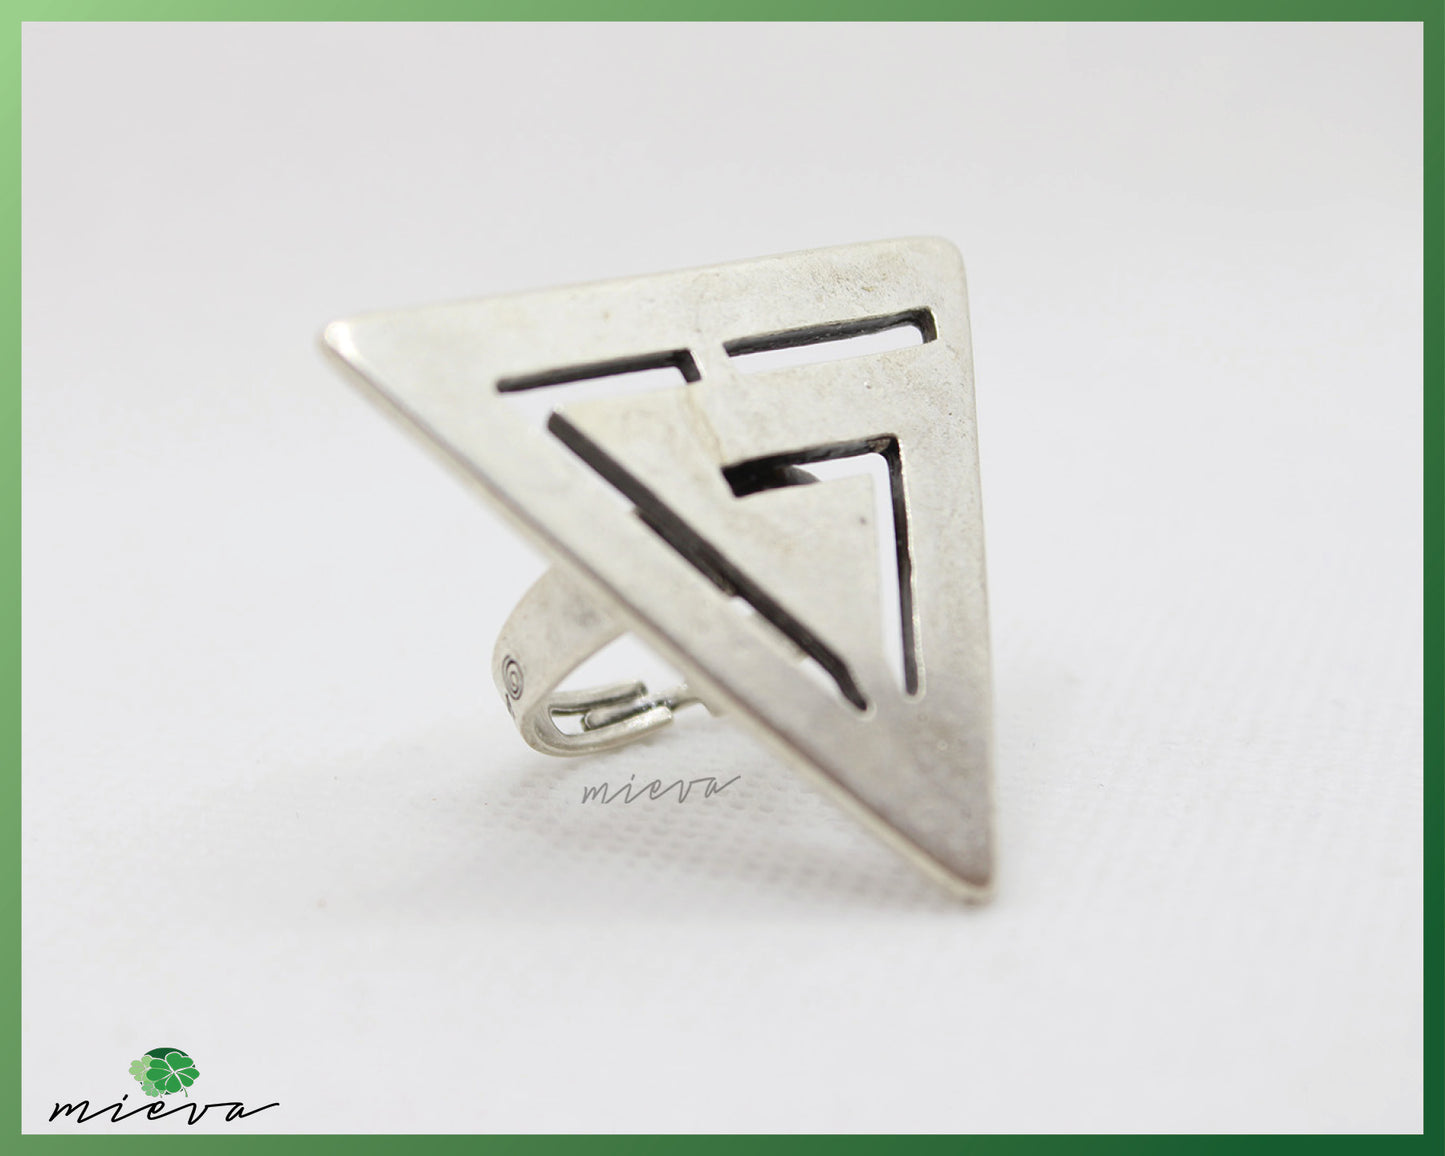 Minimalist Triangle Silver Cut-Out Ring